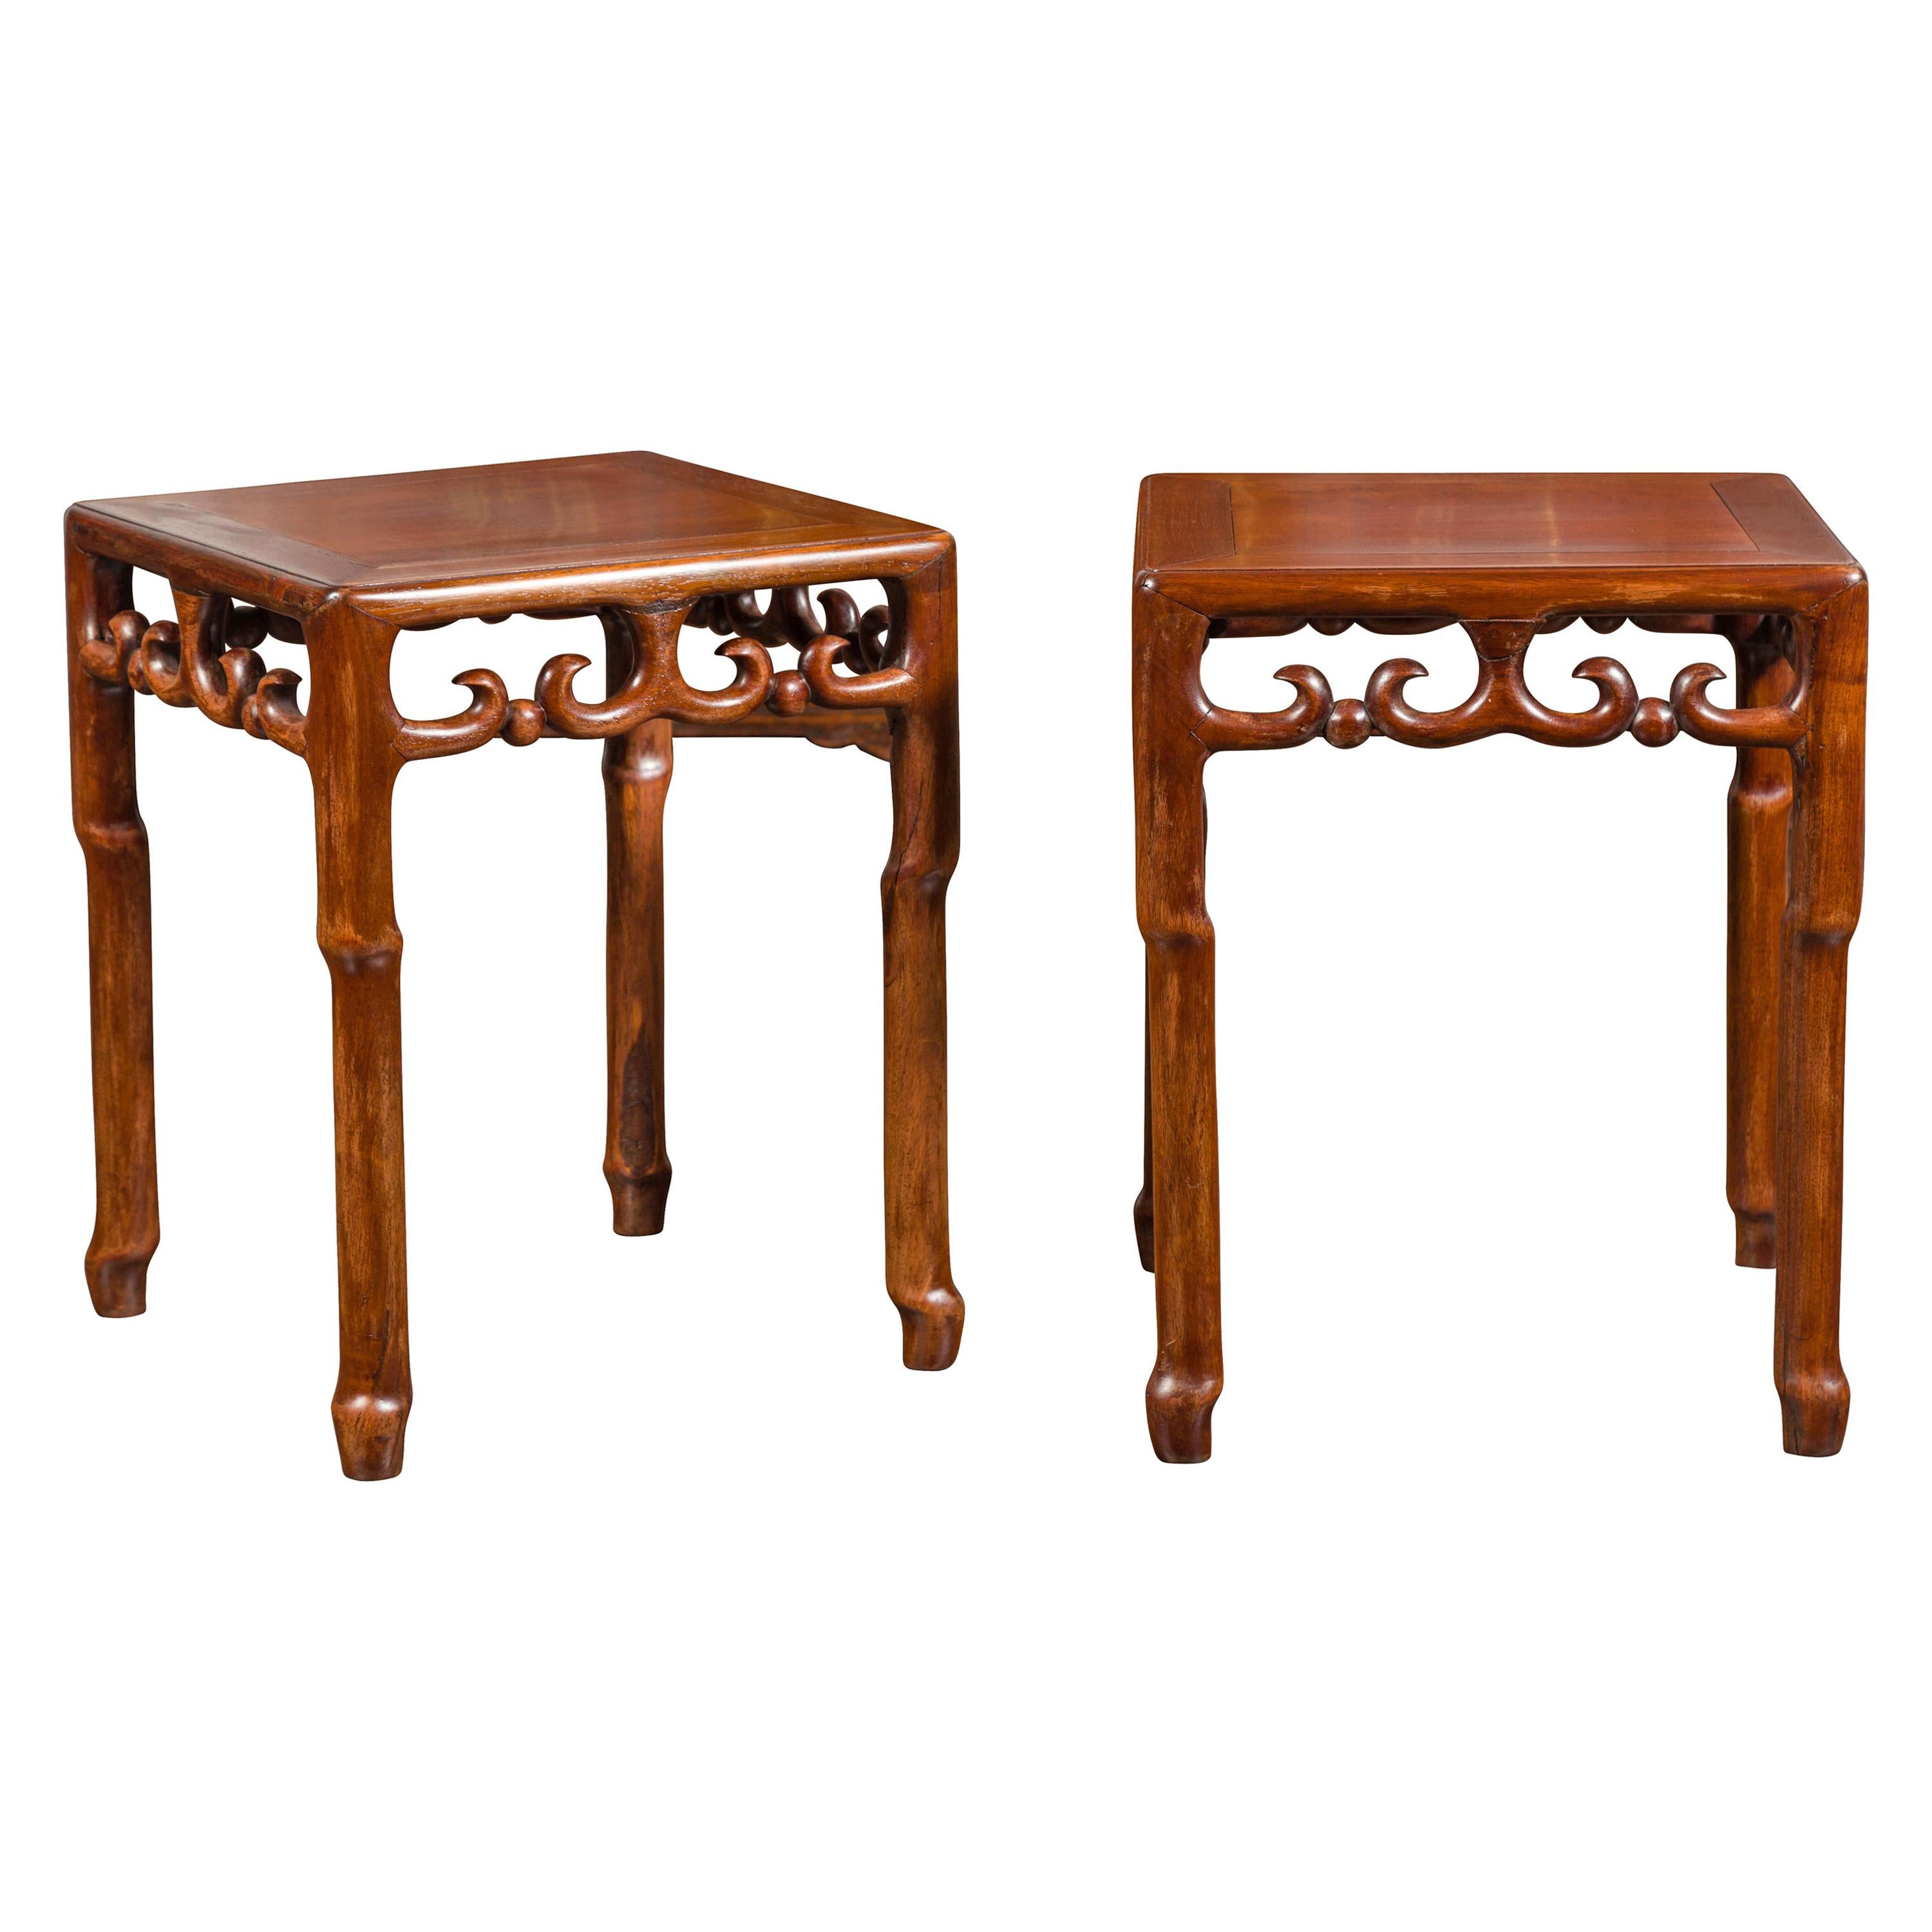 Pair of Asian Midcentury Mahogany Side Tables with Scrolling Fretwork Motifs